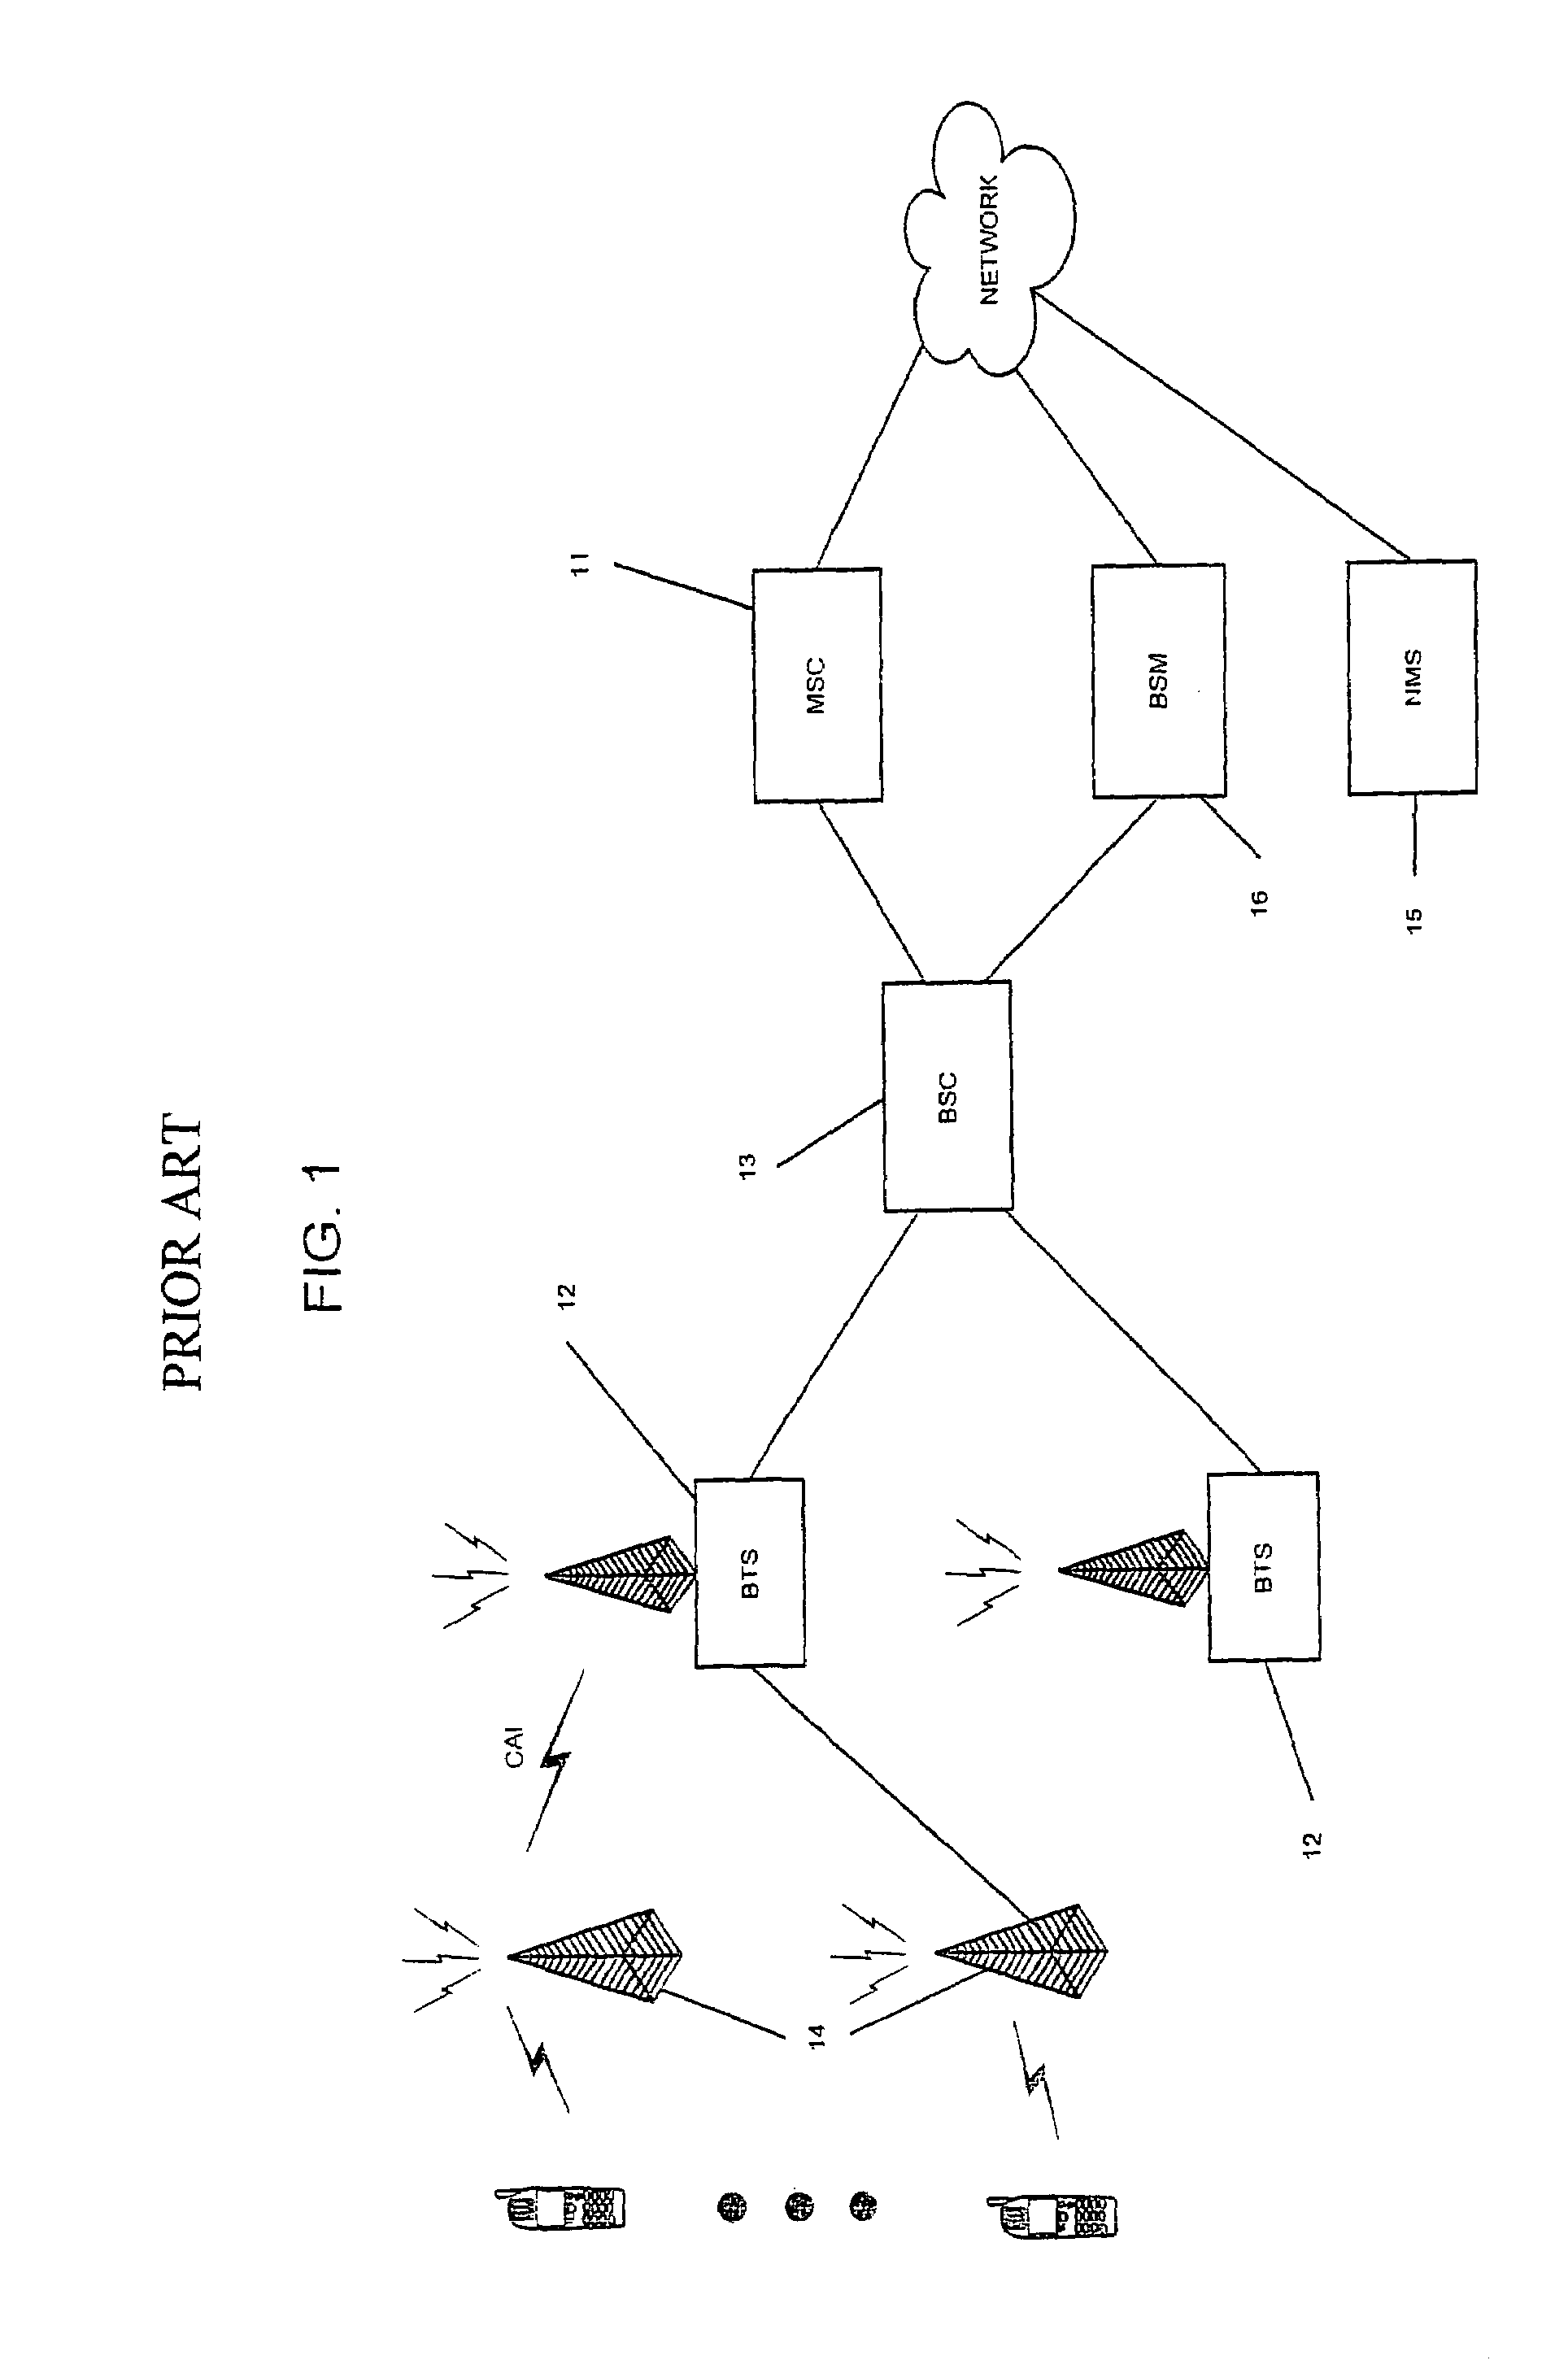 System and method for monitoring and testing network elements